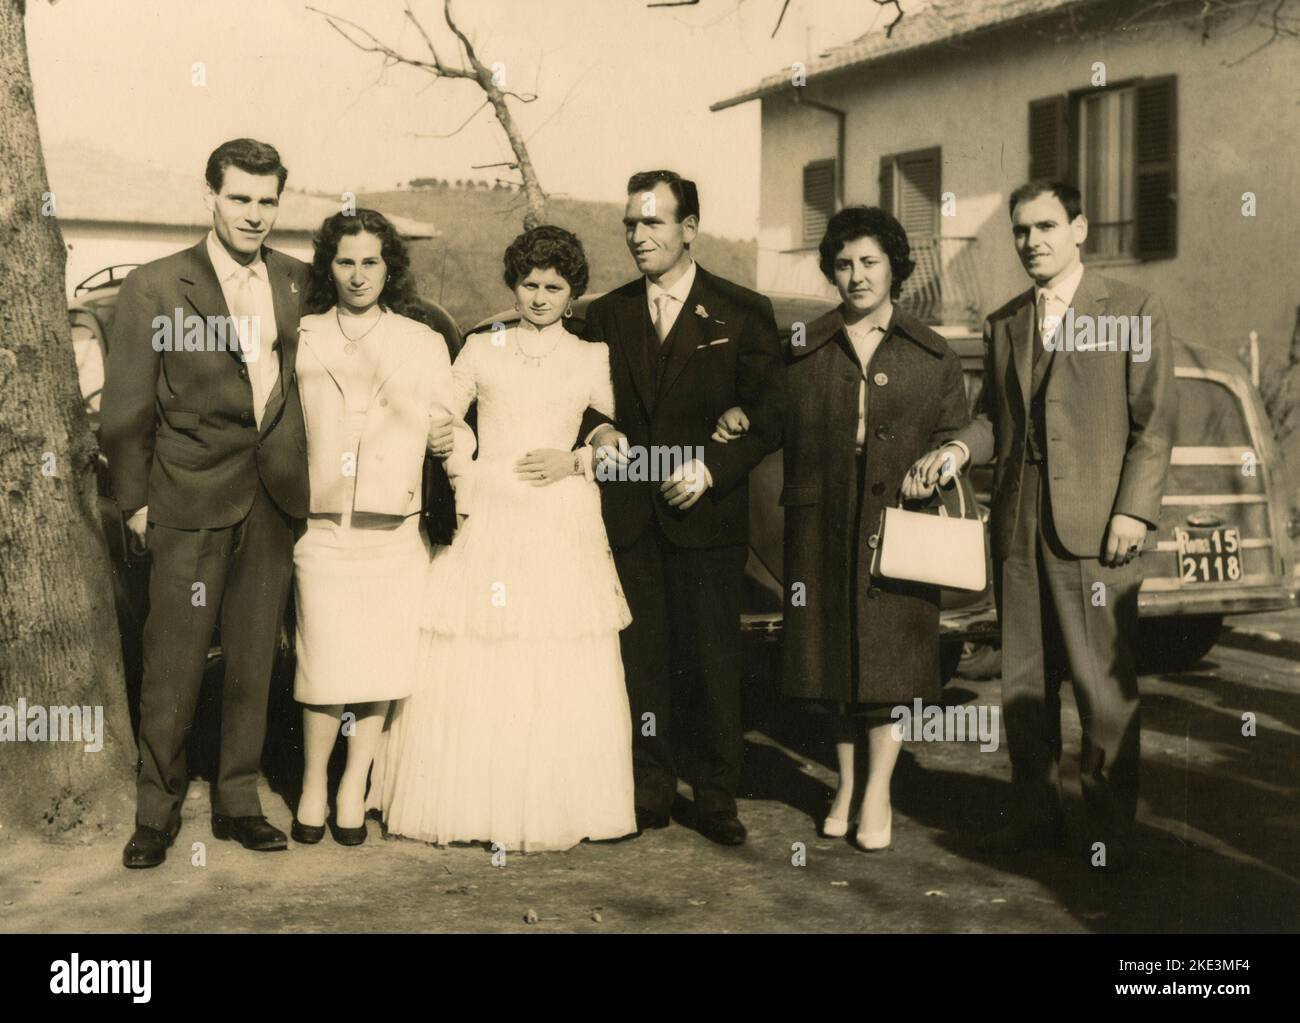 Wedding in a village in central Italy: The Bride and the Groom taking photos with friends and relatives, 1950s Stock Photo